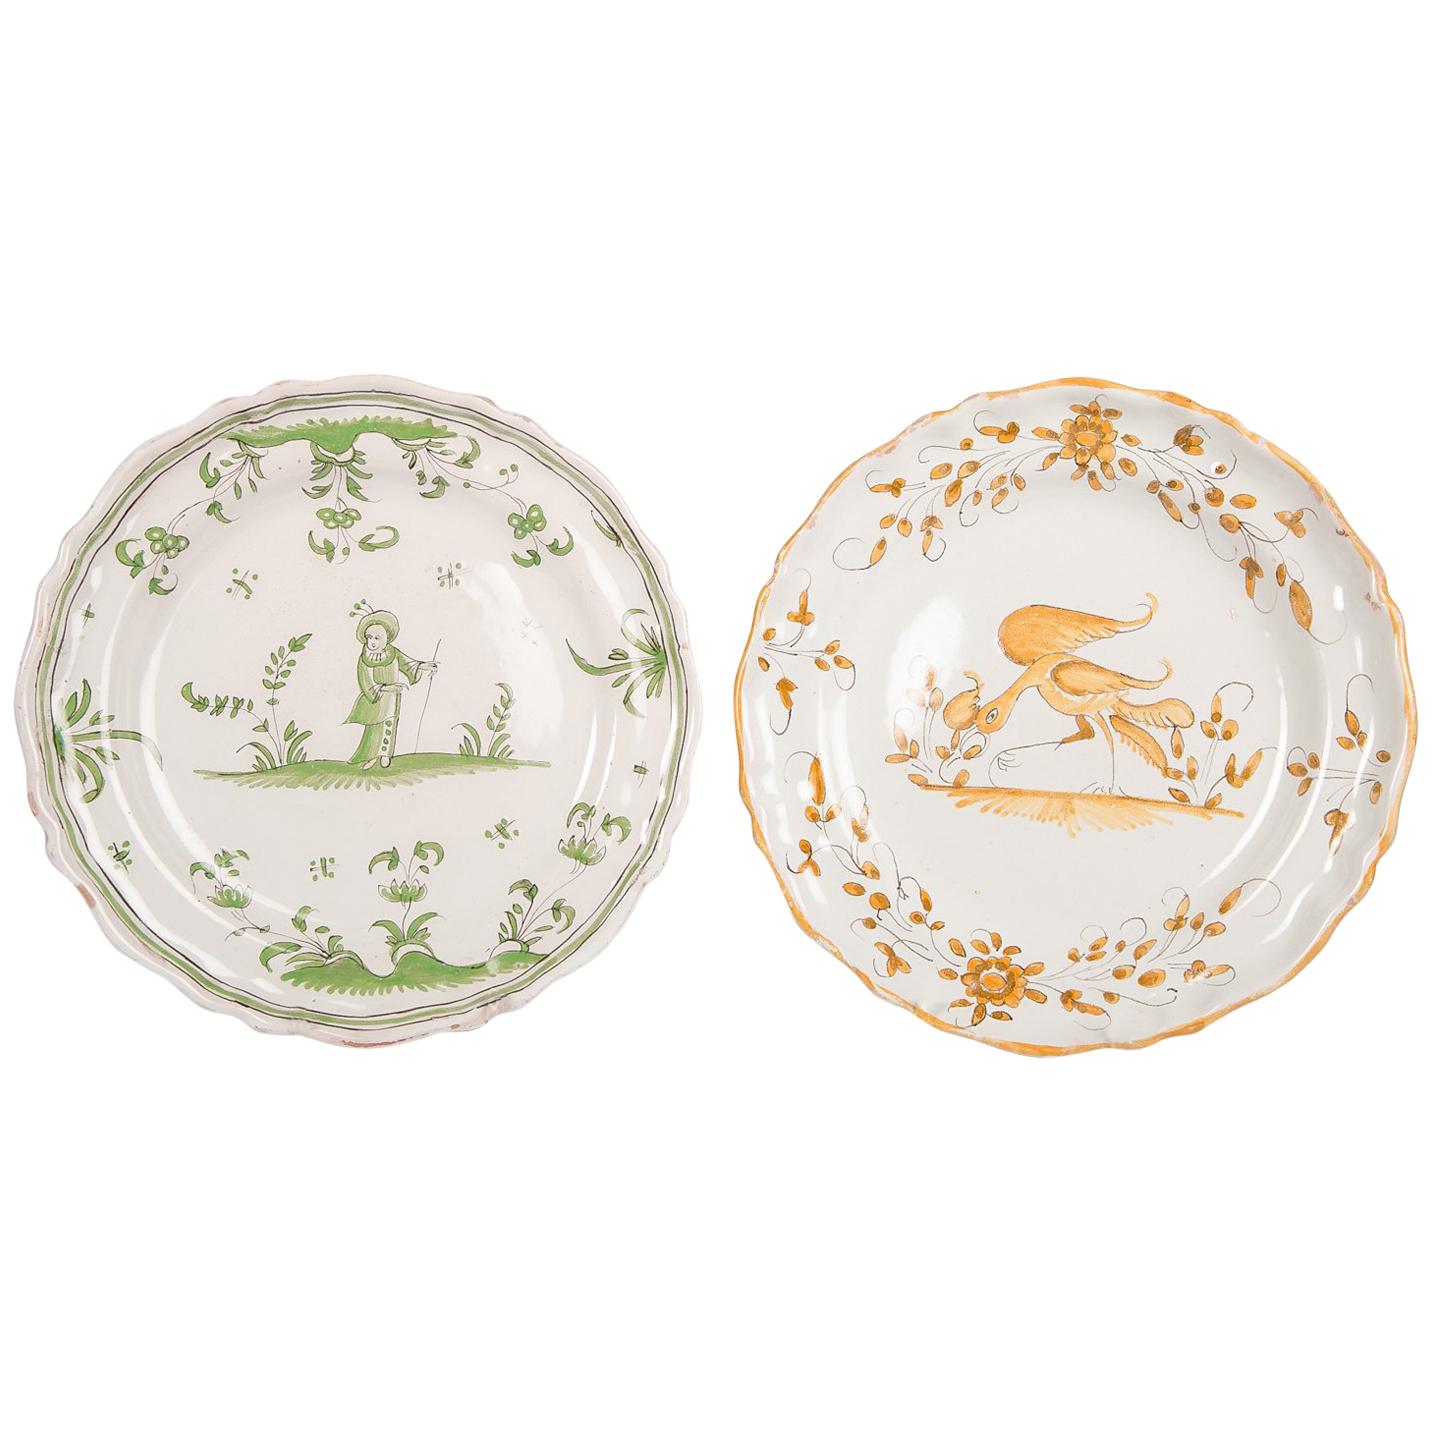 French Faience Dishes or Plates Made circa 1780 For Sale